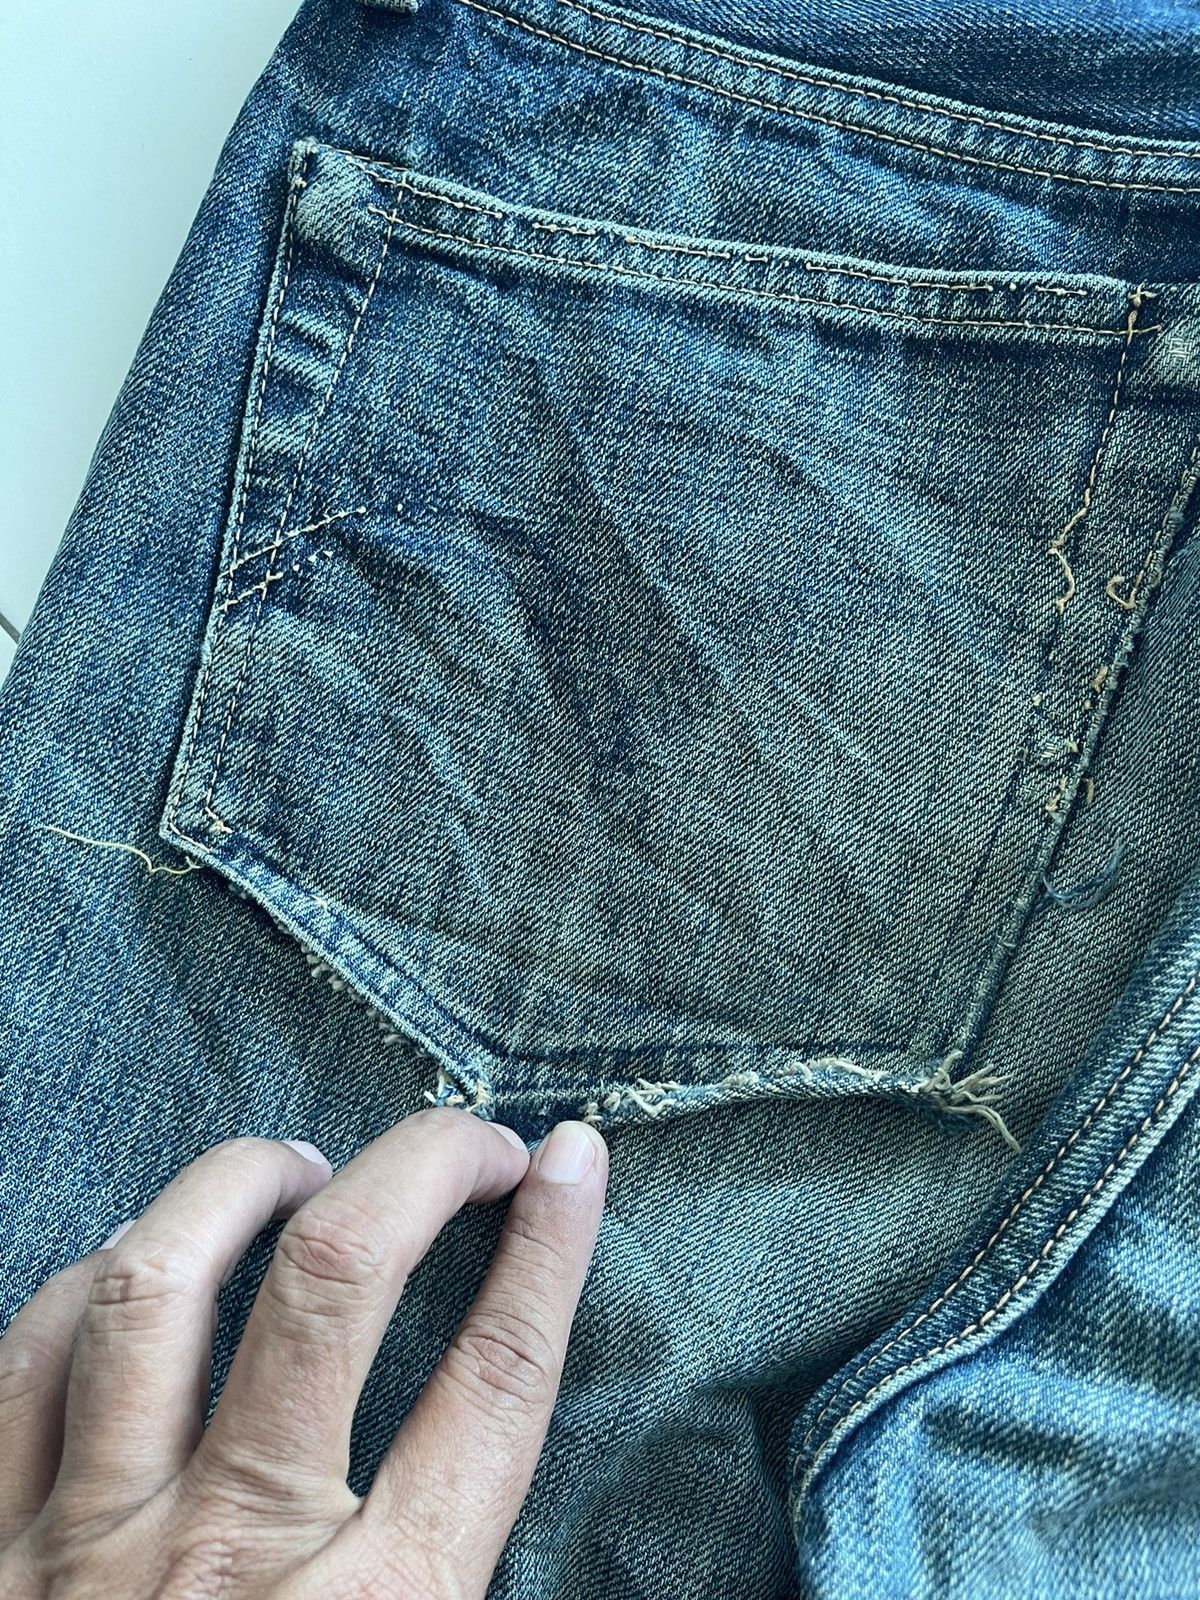 Japanese Brand - JAPANESE REPRO DENIM JEANS, BARNS OUTFITTERS & CO BRAND - 12